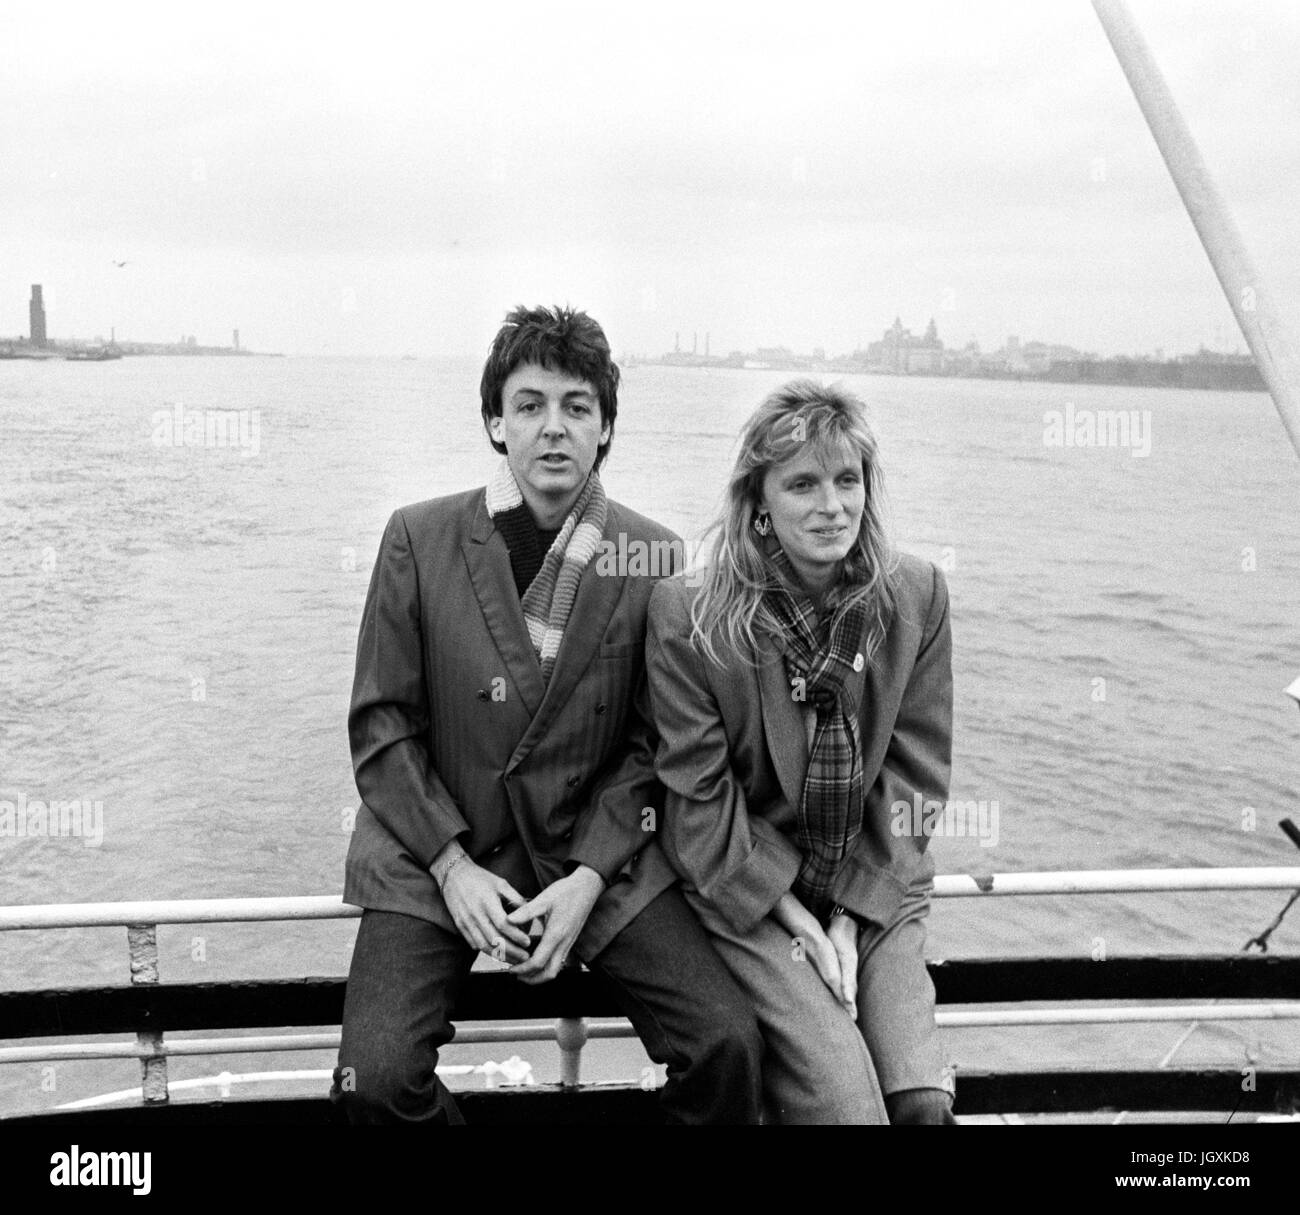 Former Beatle Paul McCartney takes the 'Royal Iris' ferry across the River Mersey with his wife, Linda, during a nostalgic trip around his native city. Stock Photo